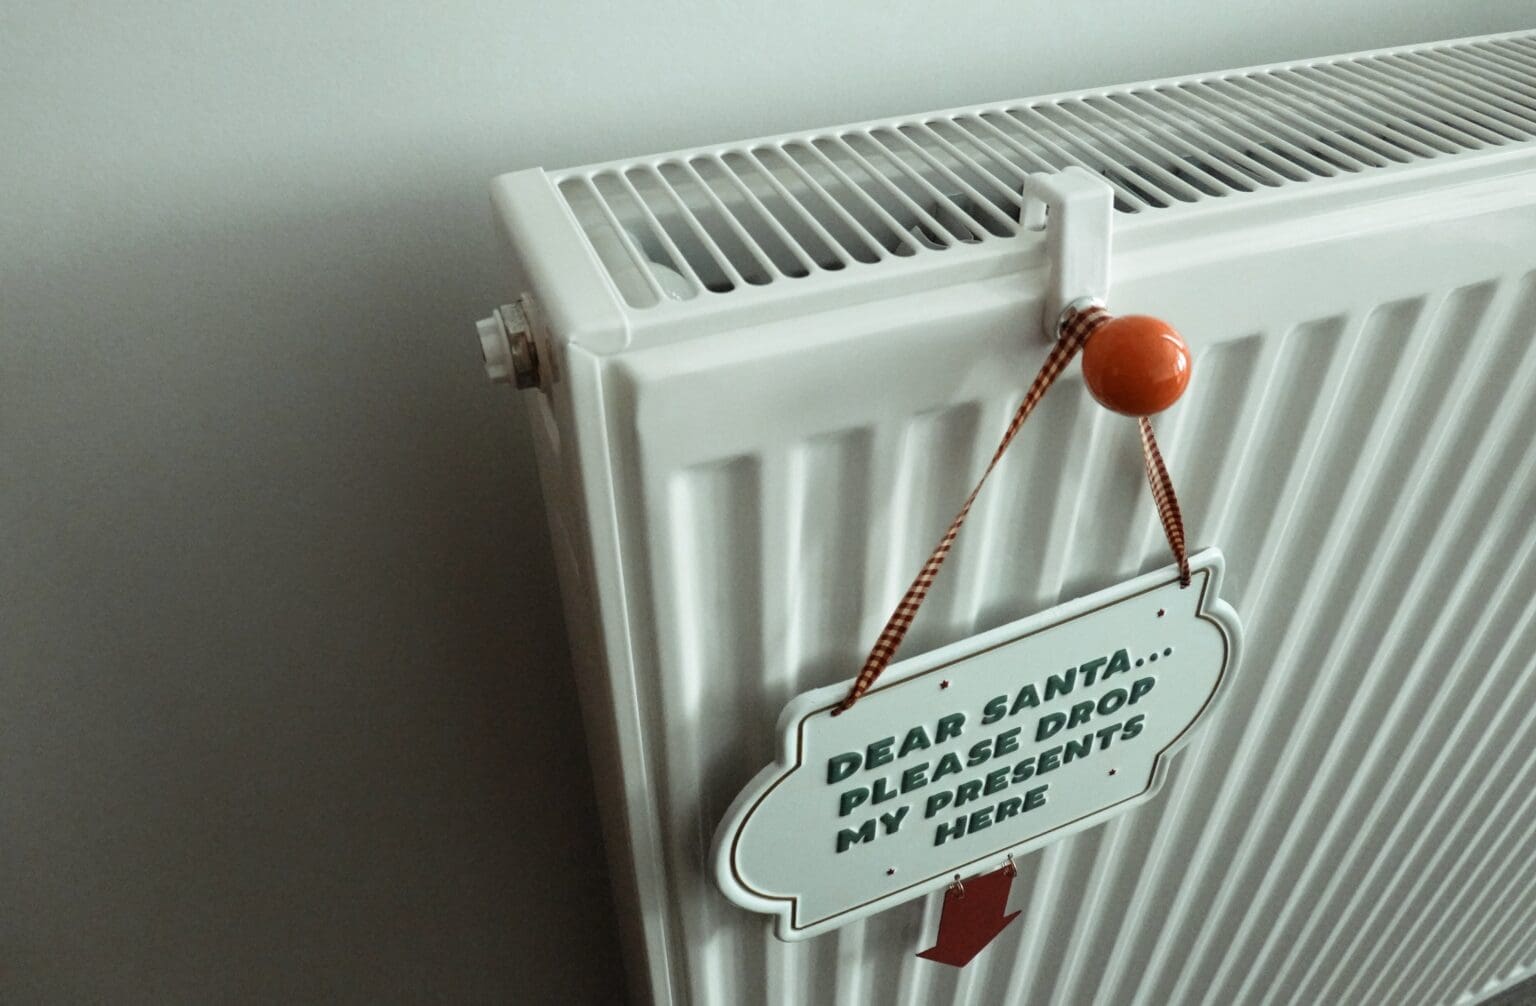 A white radiator with a decorative sign that reads "dear santa, please drop my presents here" hung by a red ribbon.